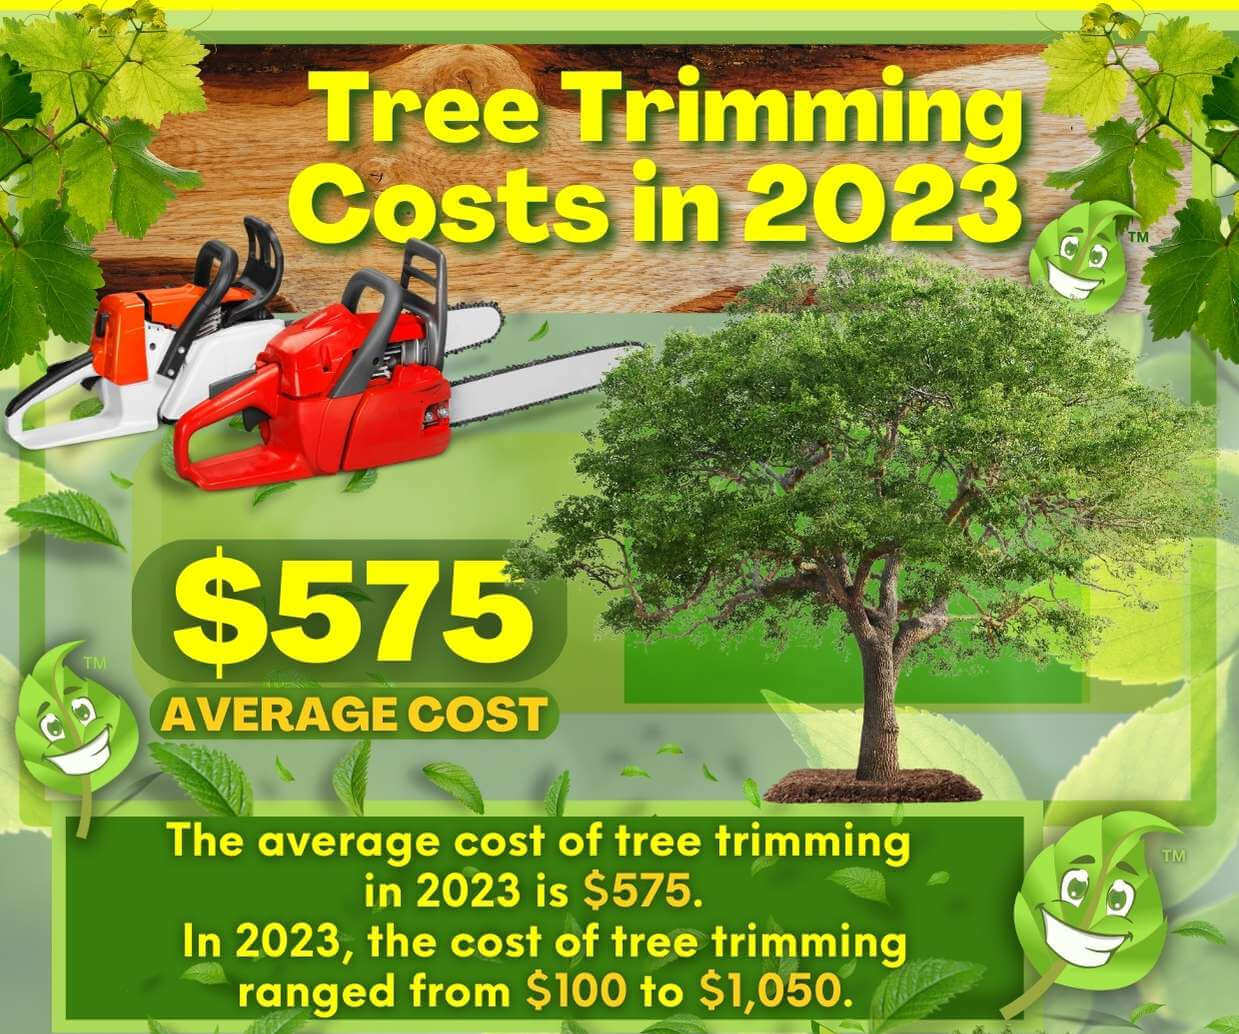 Tree Trimming Costs in 2023